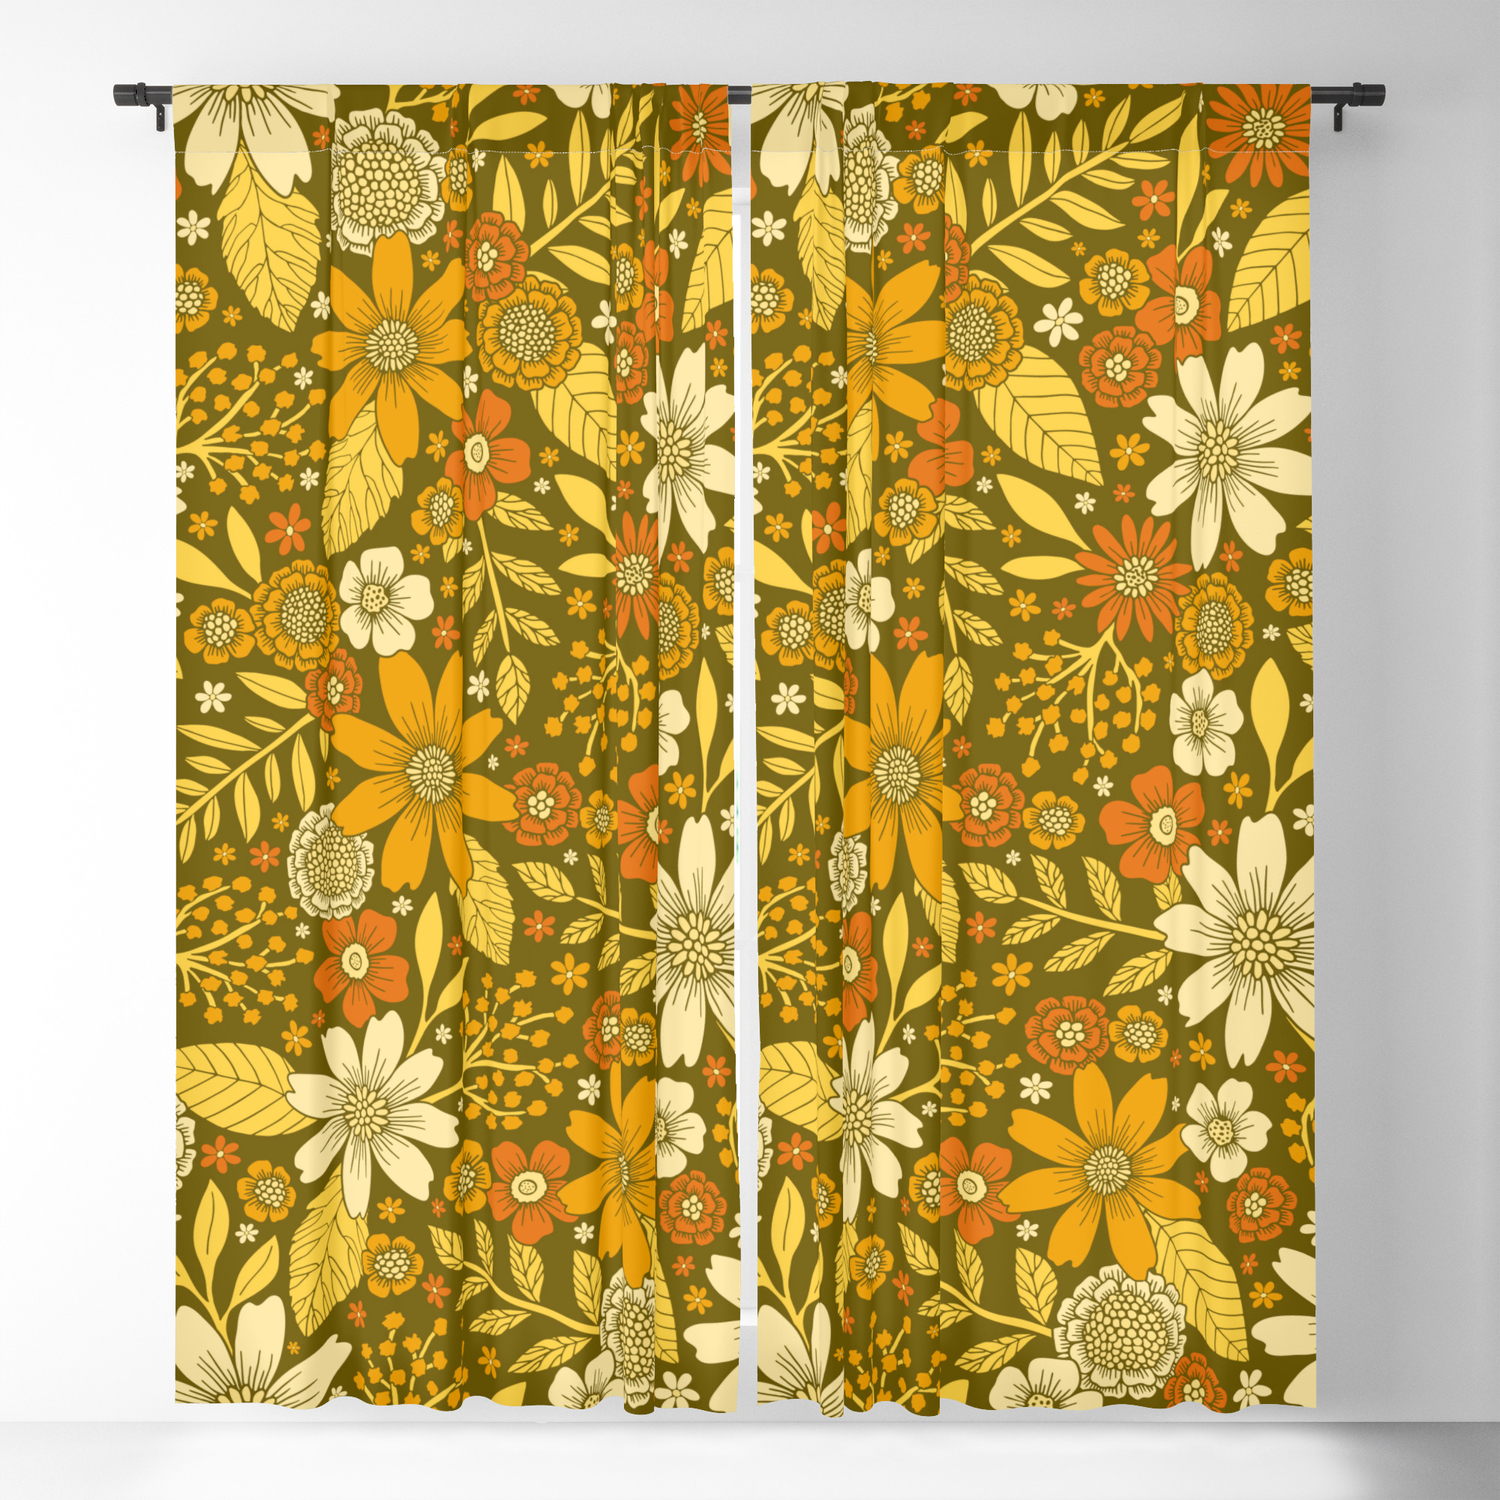 Orange & Olive Green by Beth Norton on Shower Curtain Society6 1970s Retro Flowers Pattern in Yellow